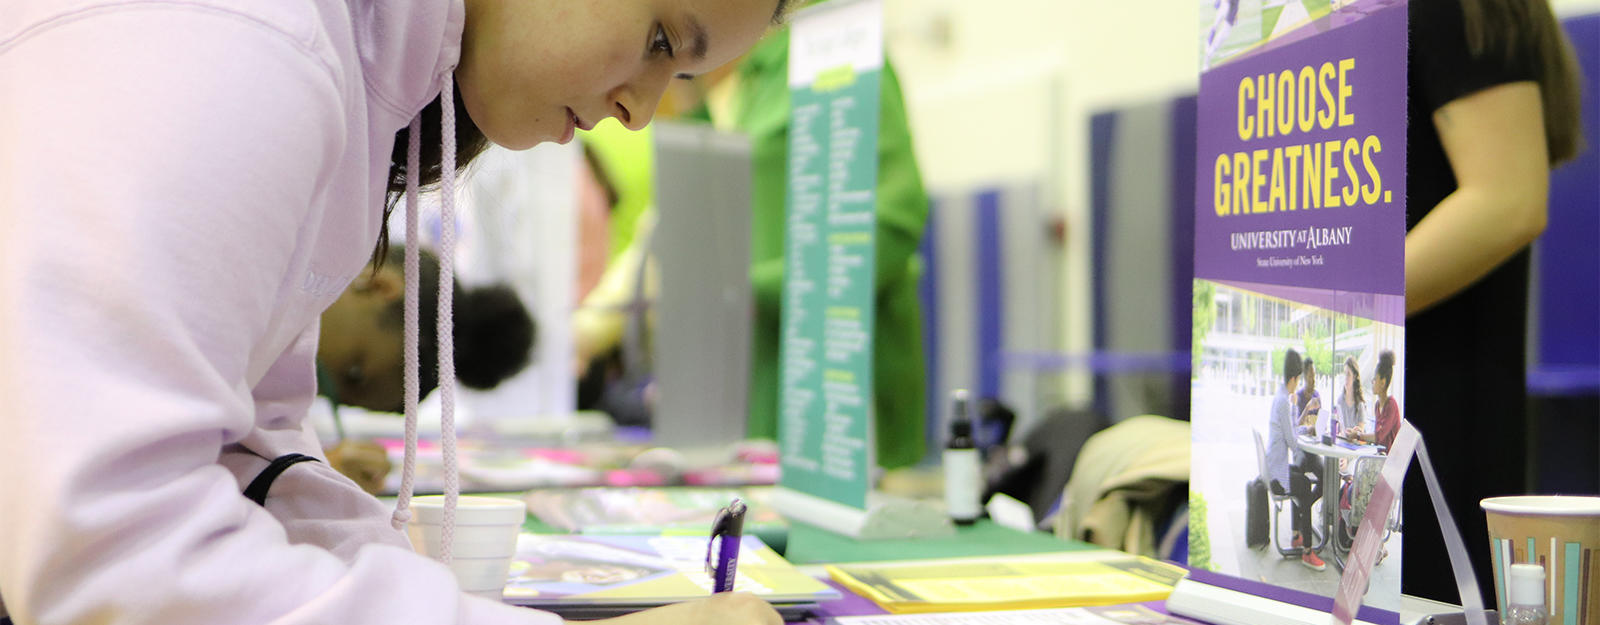 Student filling out paperwork at a SUNY Albany table during a college fair.